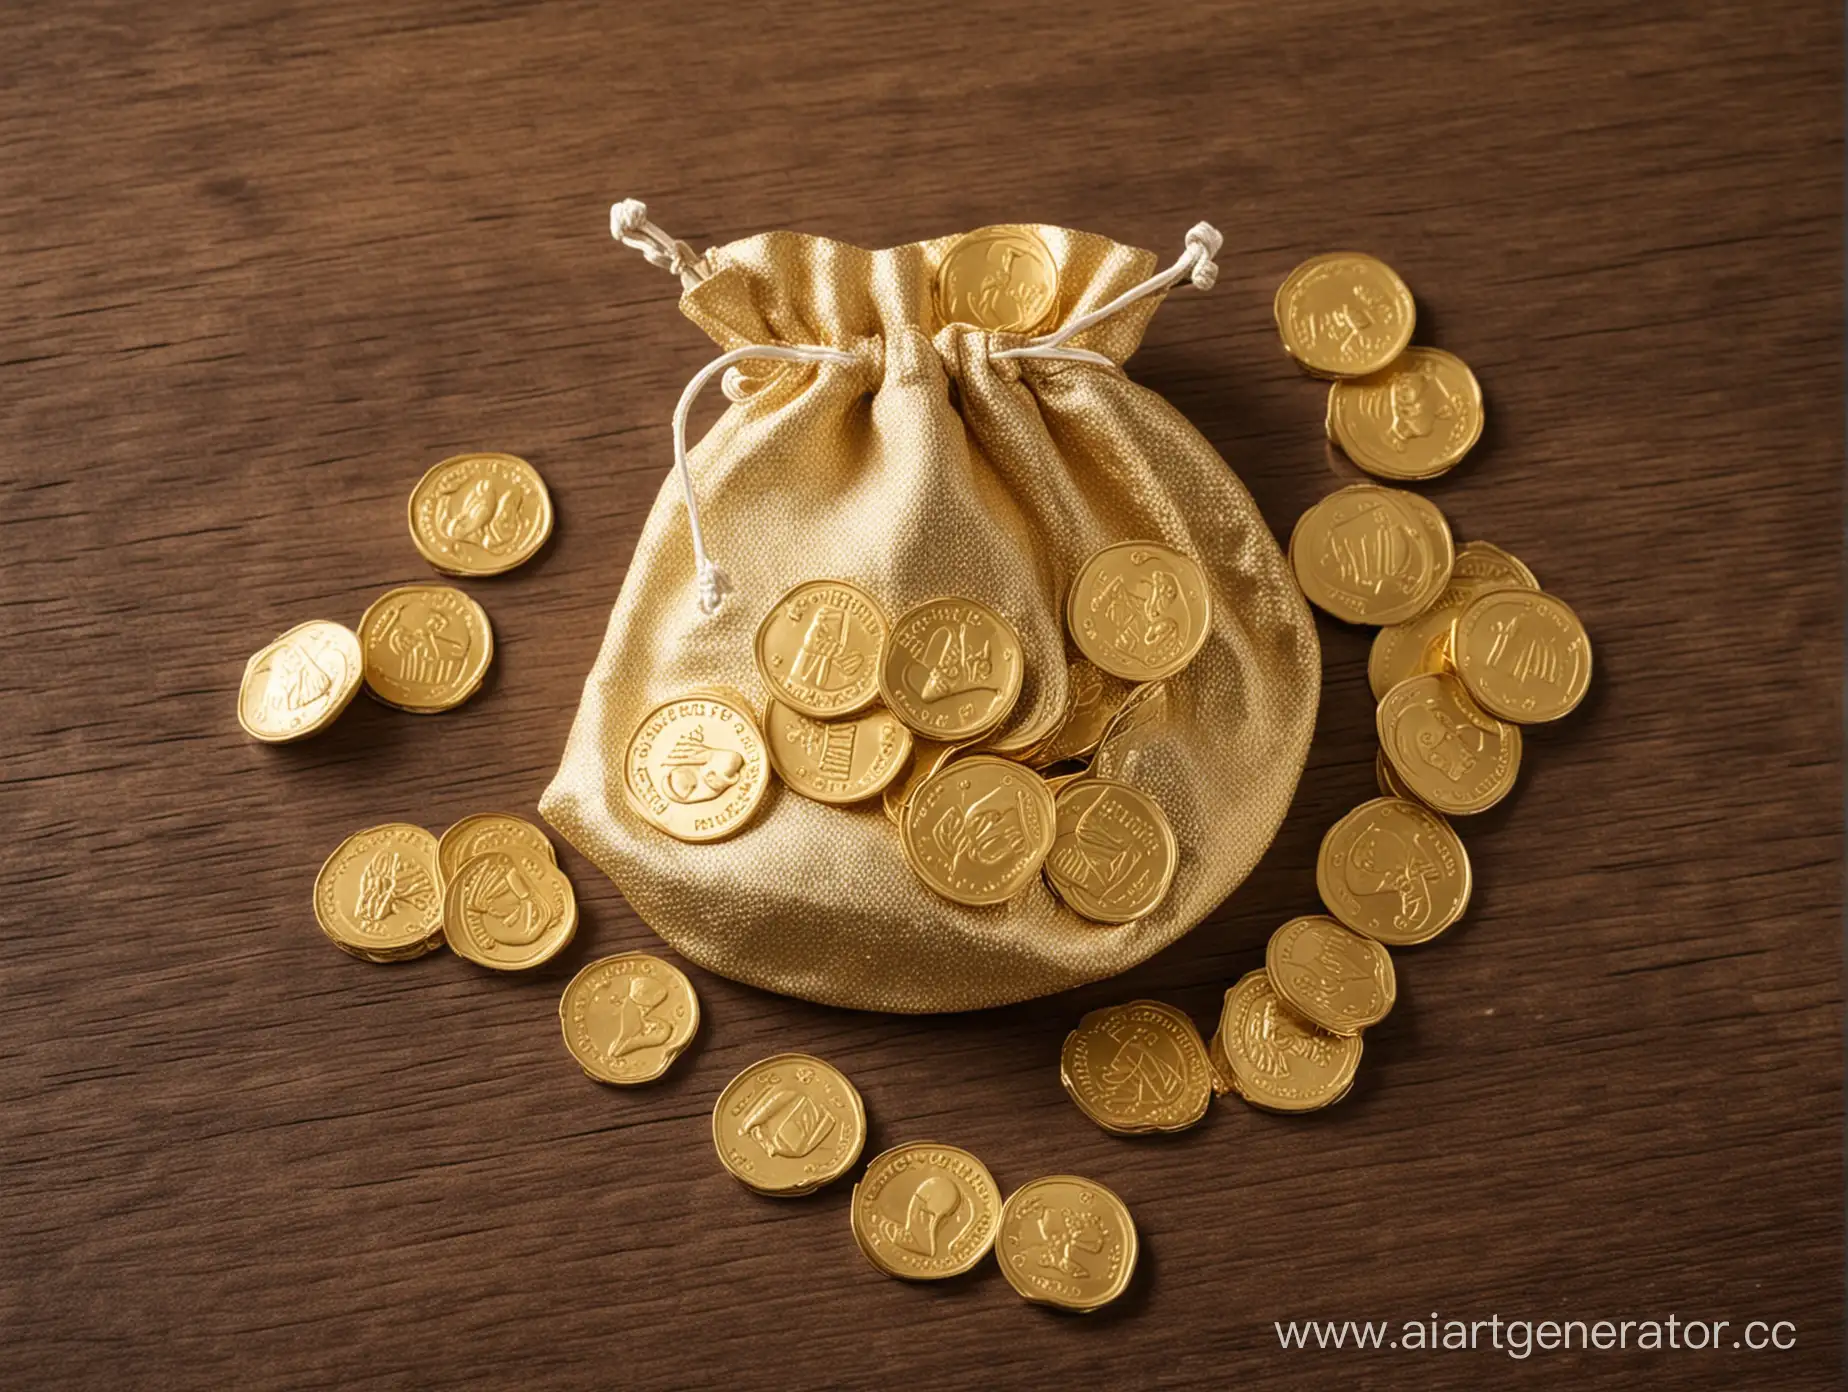 Shiny-Gold-Coins-in-a-Rustic-Pouch-Wealth-and-Treasure-Concept